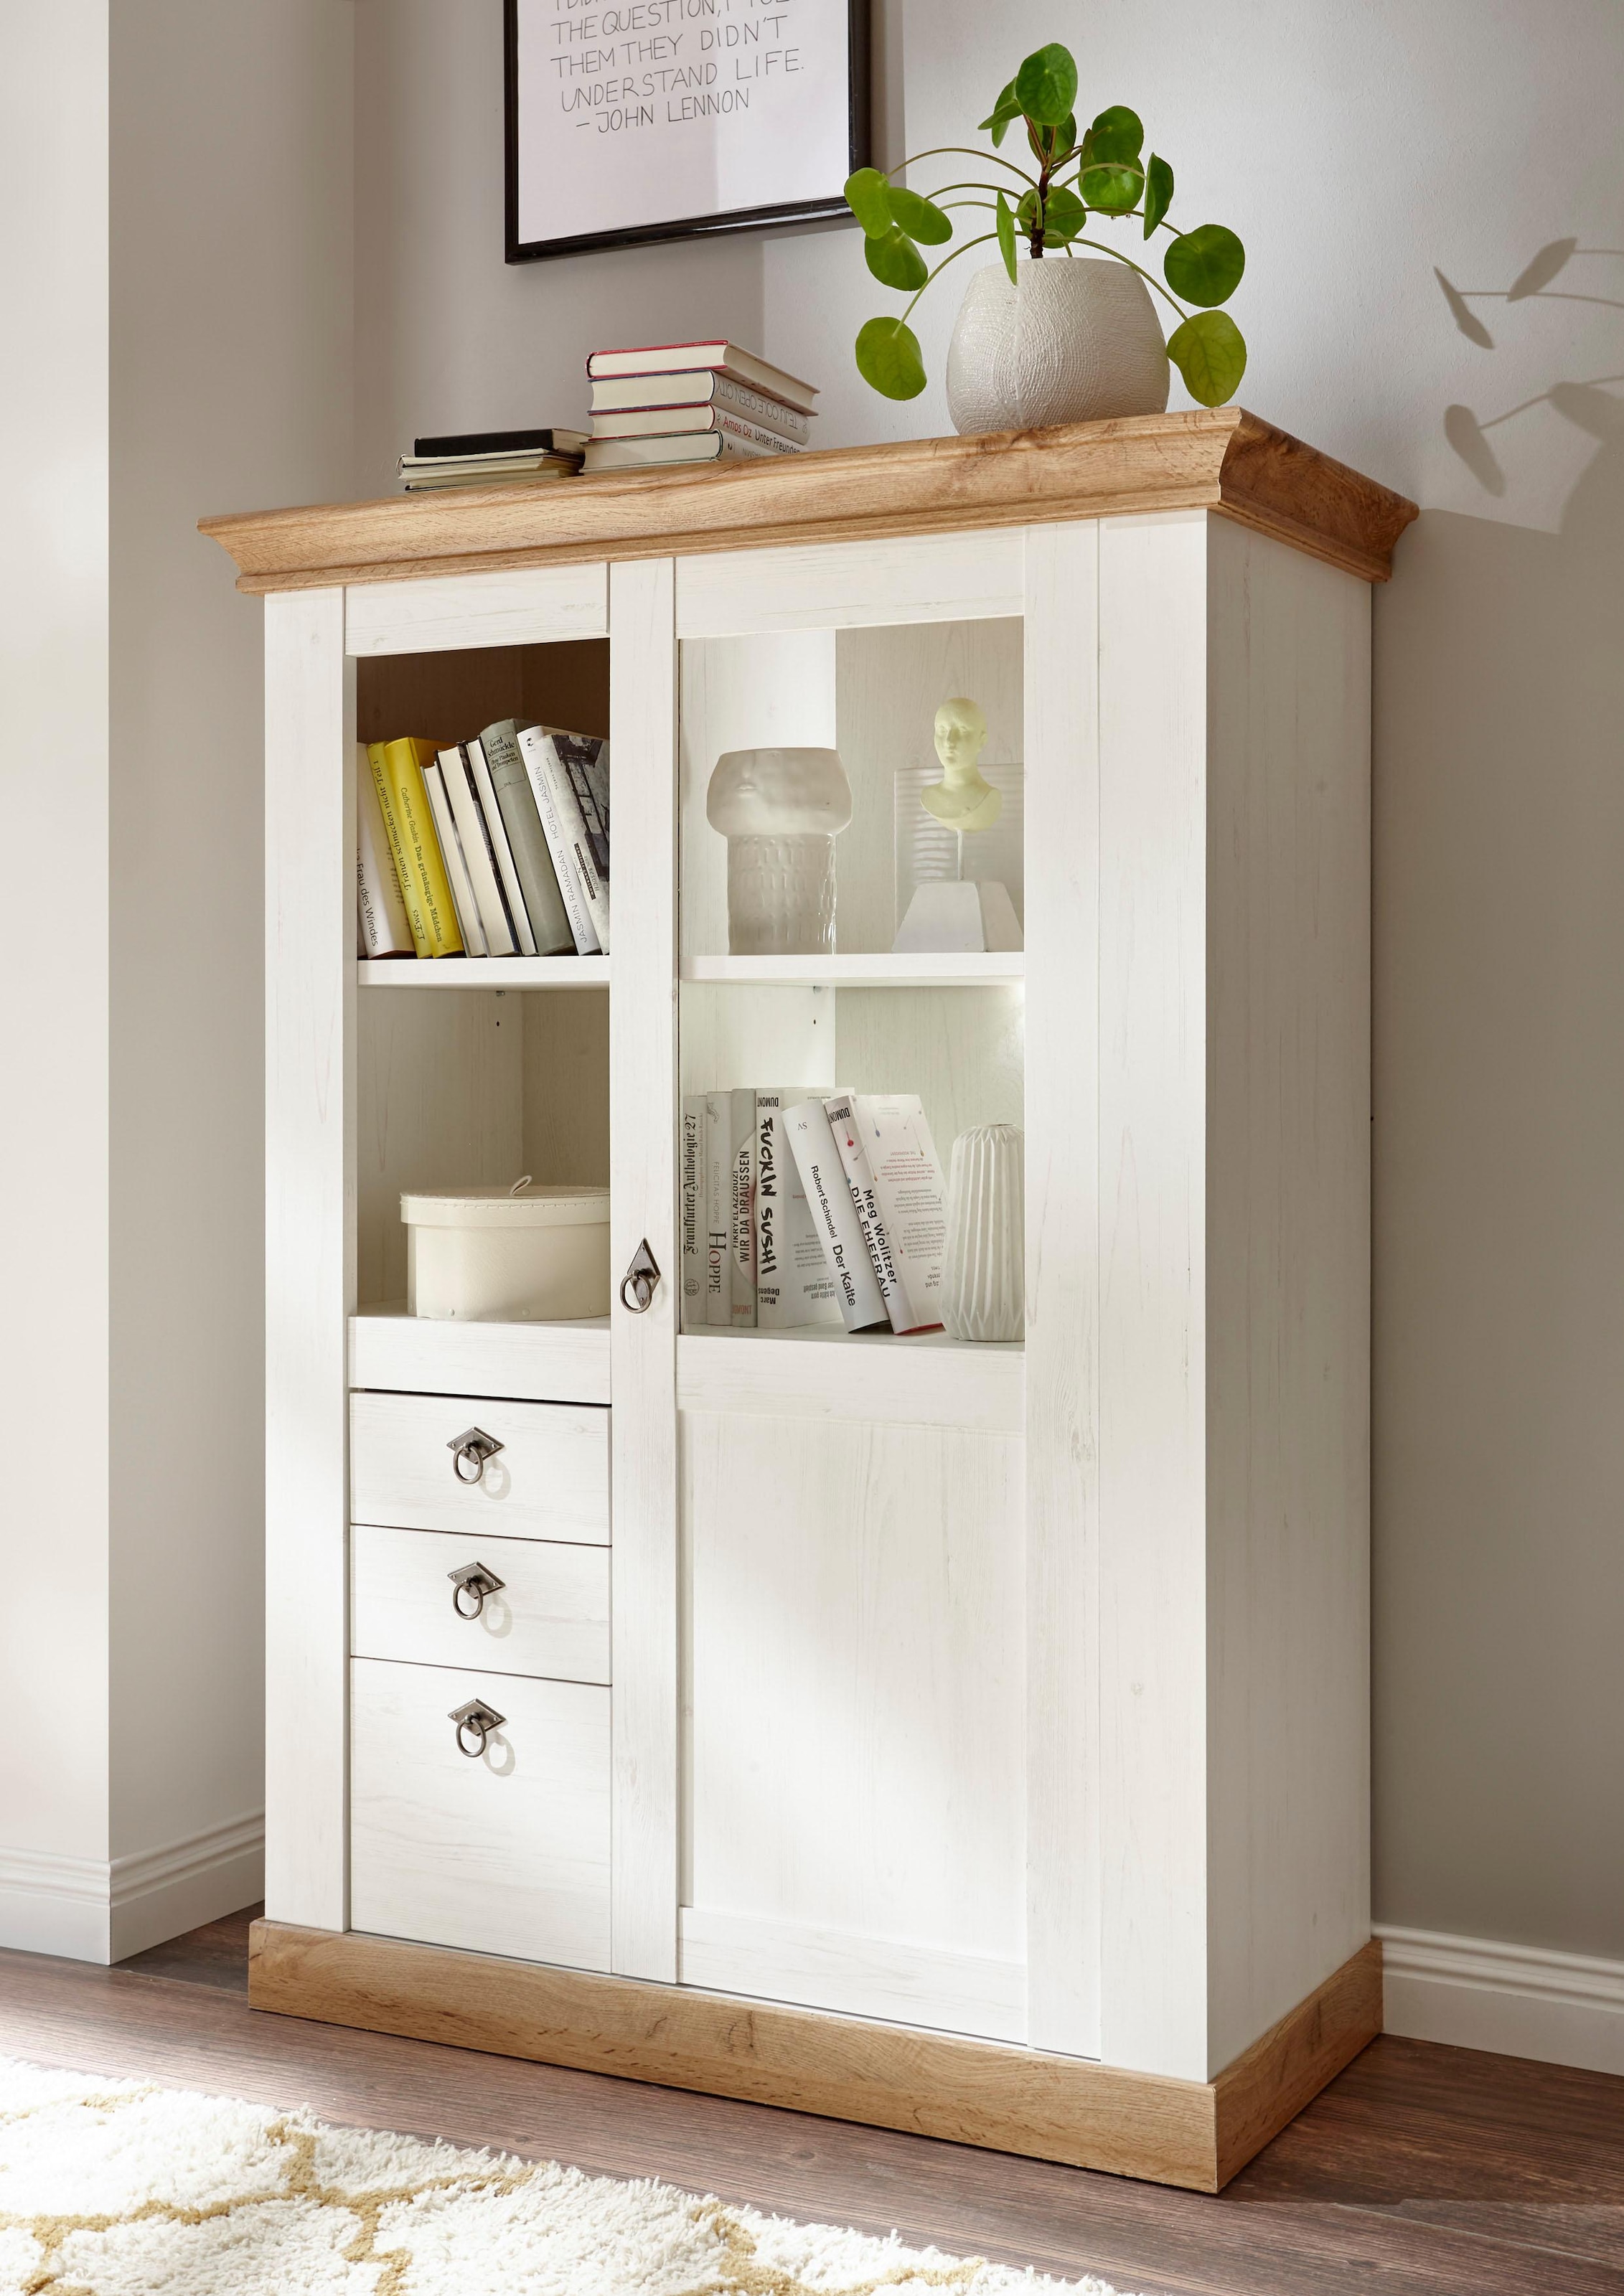 Home affaire Highboard "Cremona", Höhe 139 cm